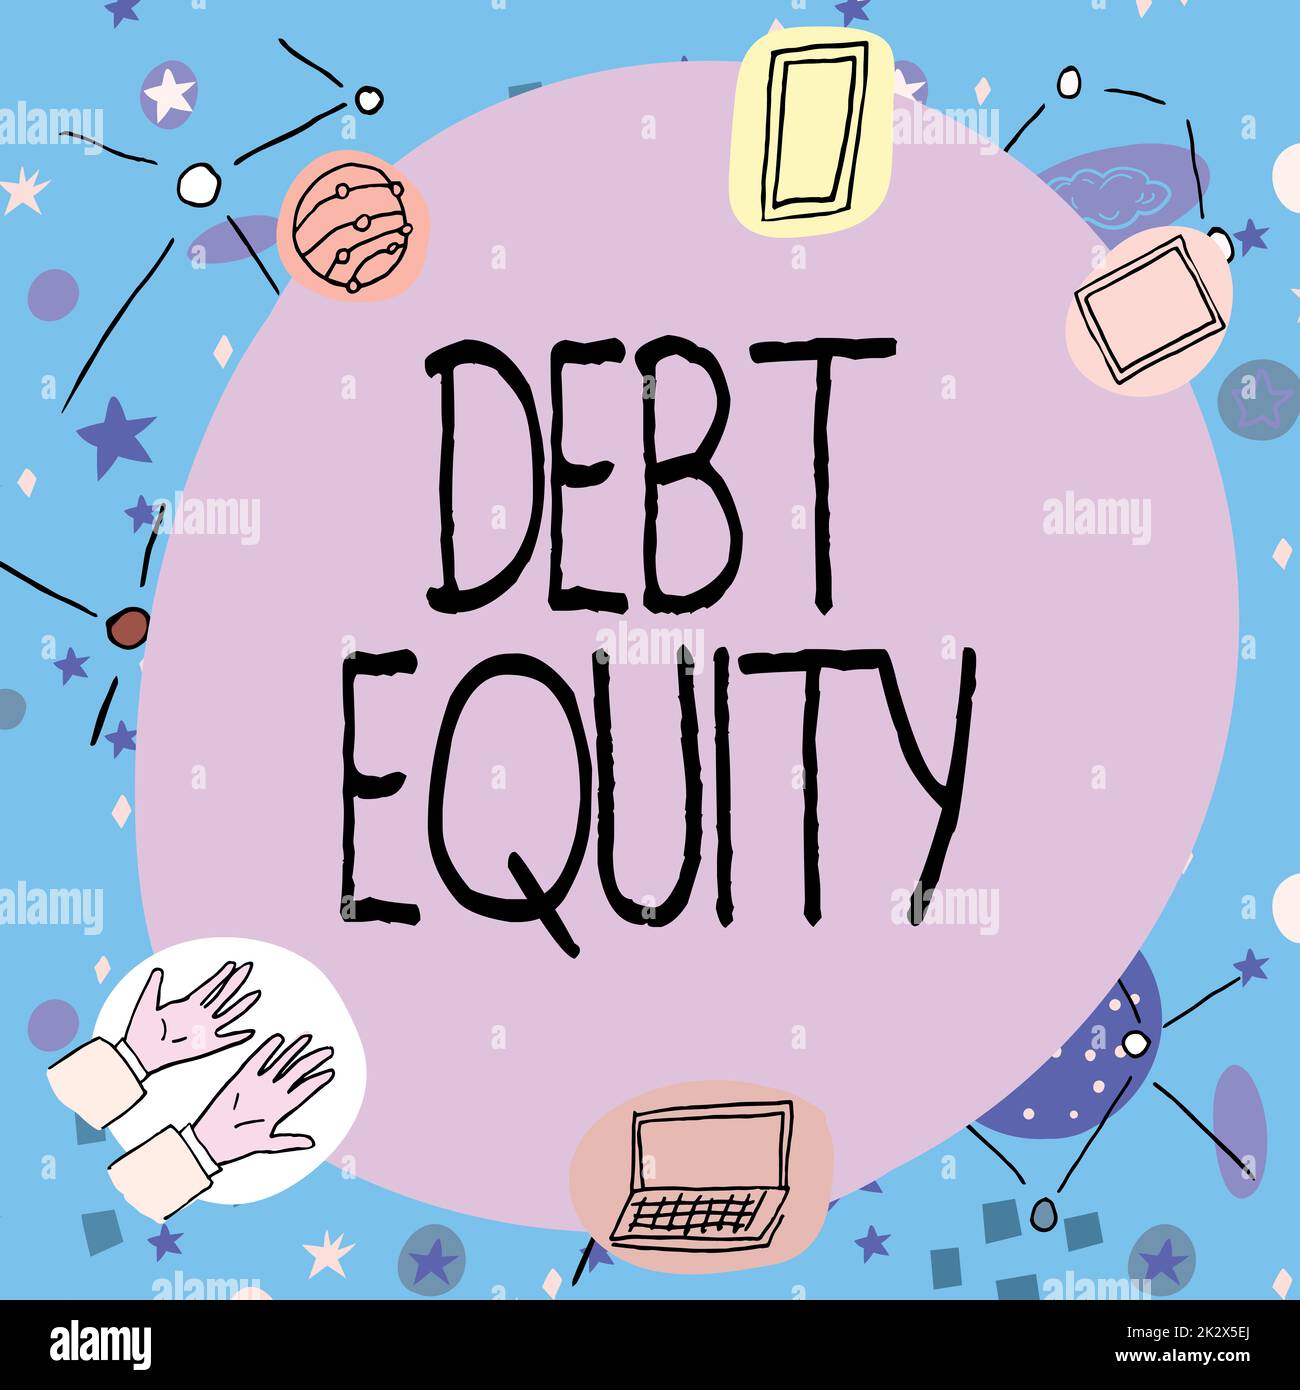 Writing displaying text Debt Equity. Concept meaning dividing companys total liabilities by its stockholders Blank frame decorated with modern science symbols displaying technology. Stock Photo